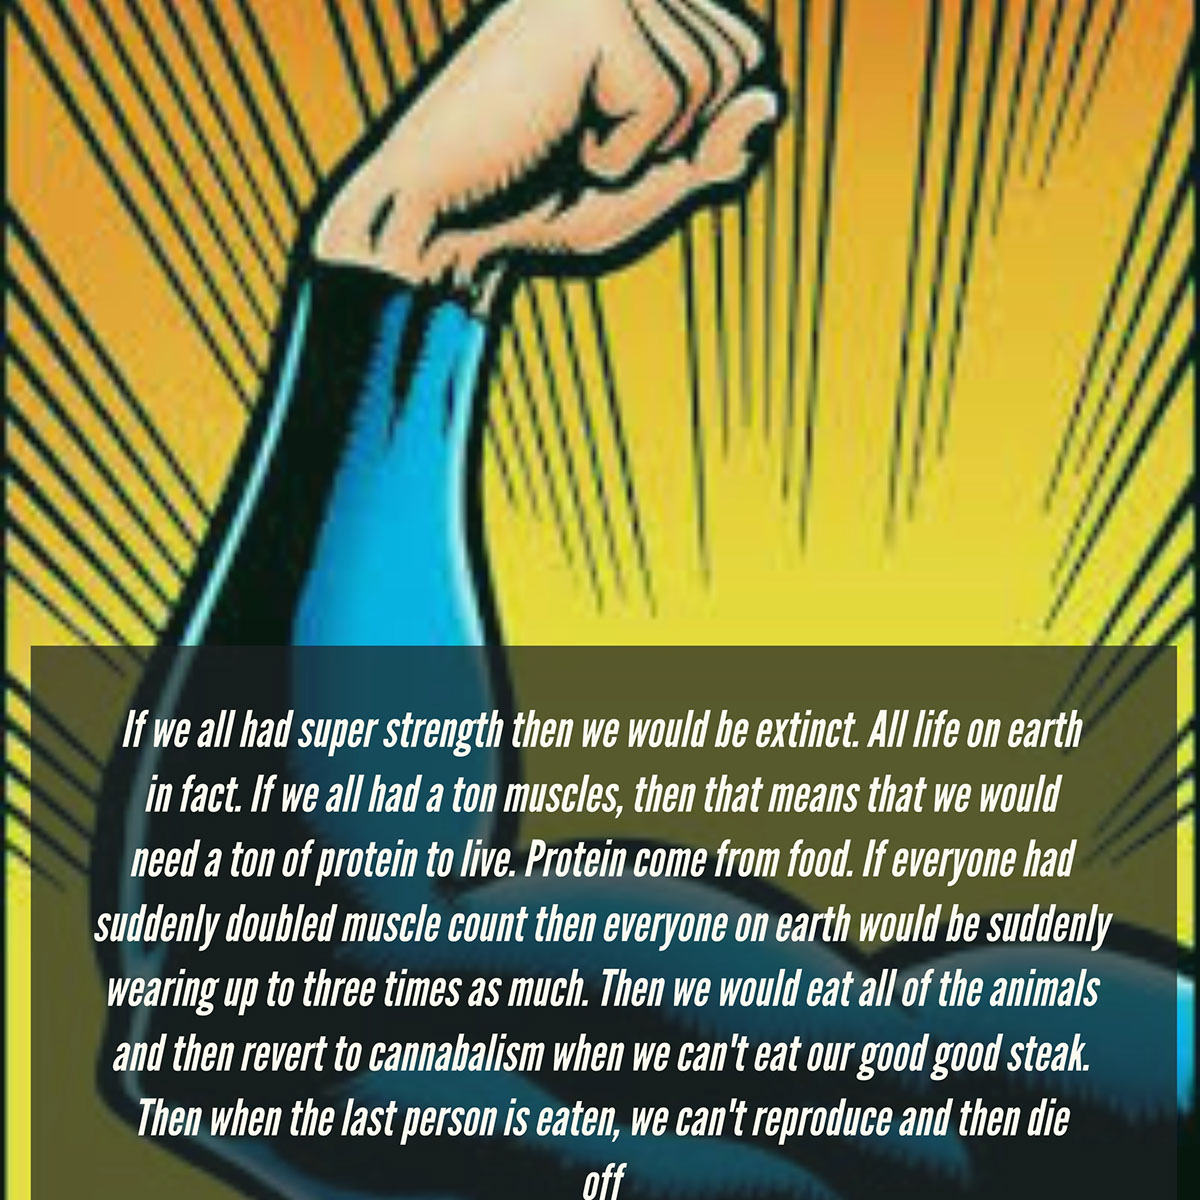 If we all had super strength then we would be extinct. All life on earth in fact. If we all had a ton muscles, then that means that we would need a ton of protein to live. Protein come from food. If everyone had suddenly doubled muscle count then everyone on earth would be suddenly wearing up to three times as much. Then we would eat all of the animals and then revert to cannabalism when we can't eat our good good steak. Then when the last person is eaten, we can't reproduce and then die off